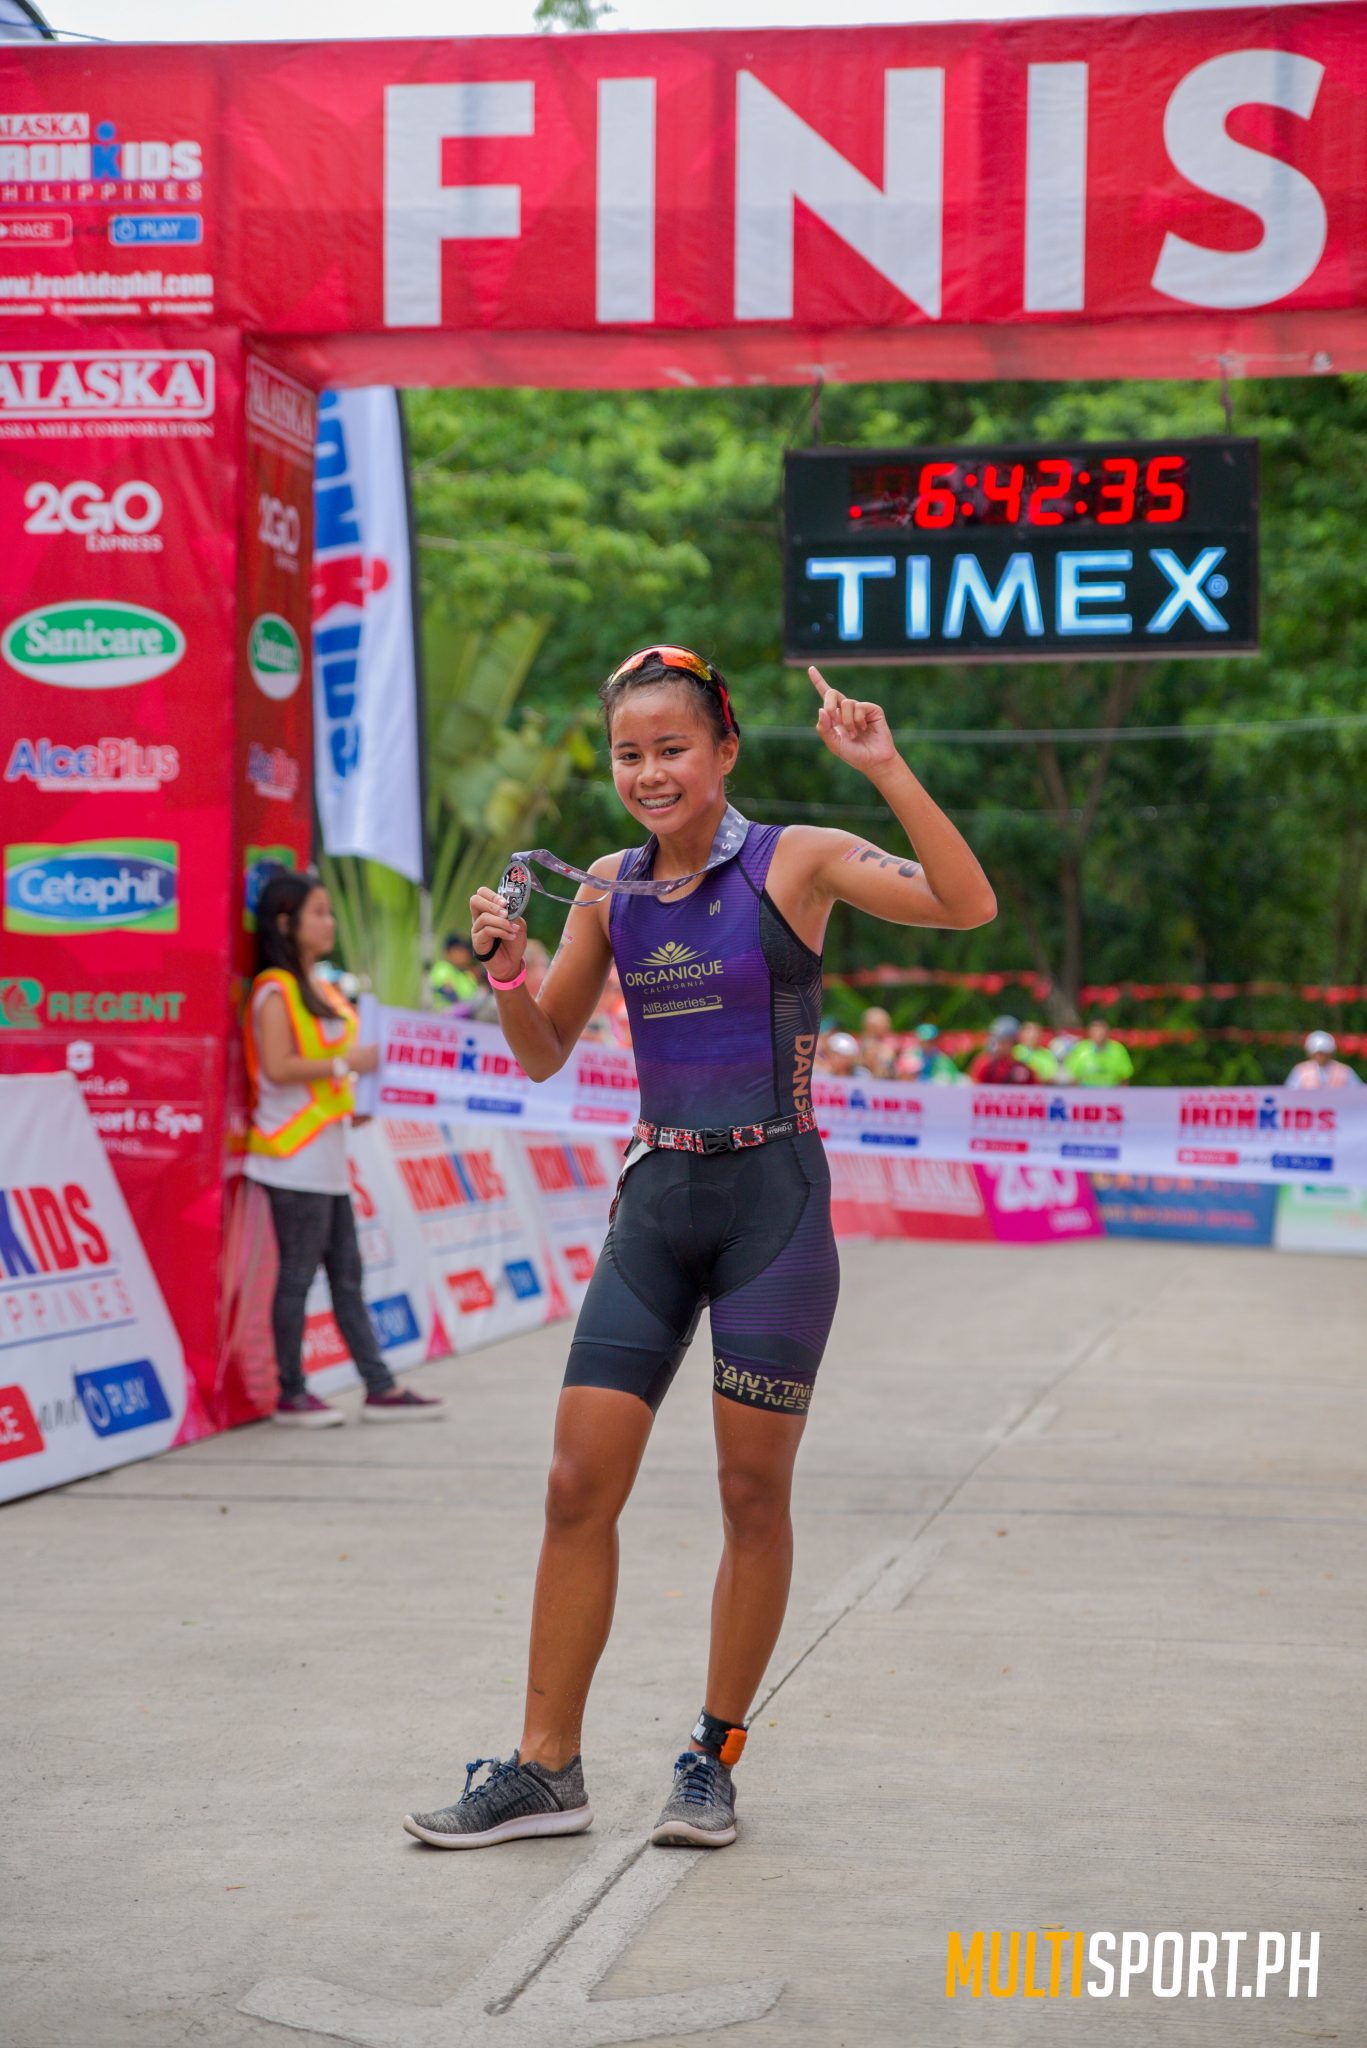 13-year-old Moira Frances Erediano clinched the top spot in the IronKids girls' division, defeating Nicole Marie del Rosario by about 40 seconds